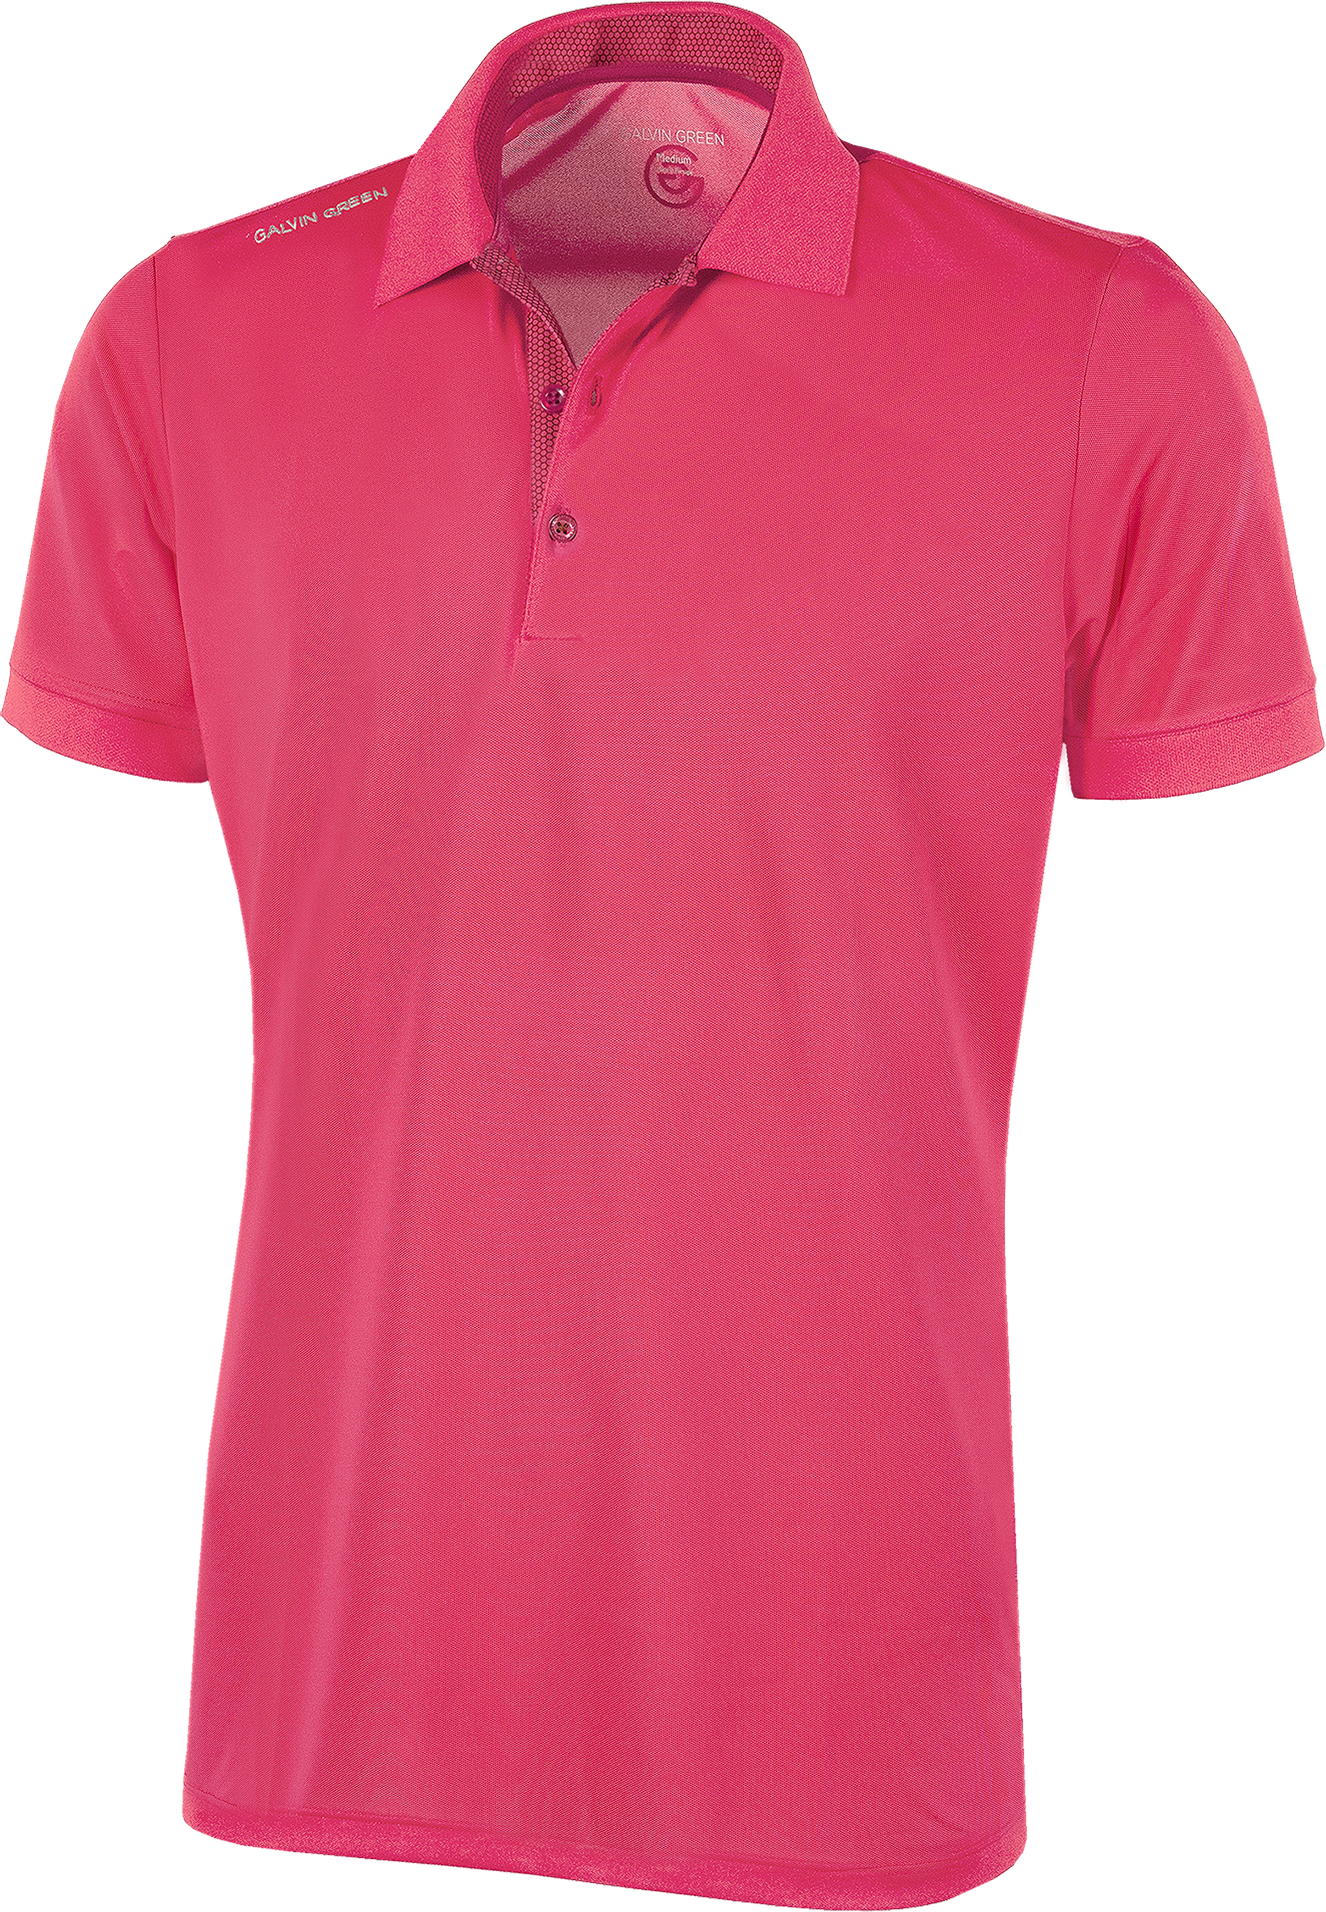 Galvin Green Max Ventils Plus Polo, pink